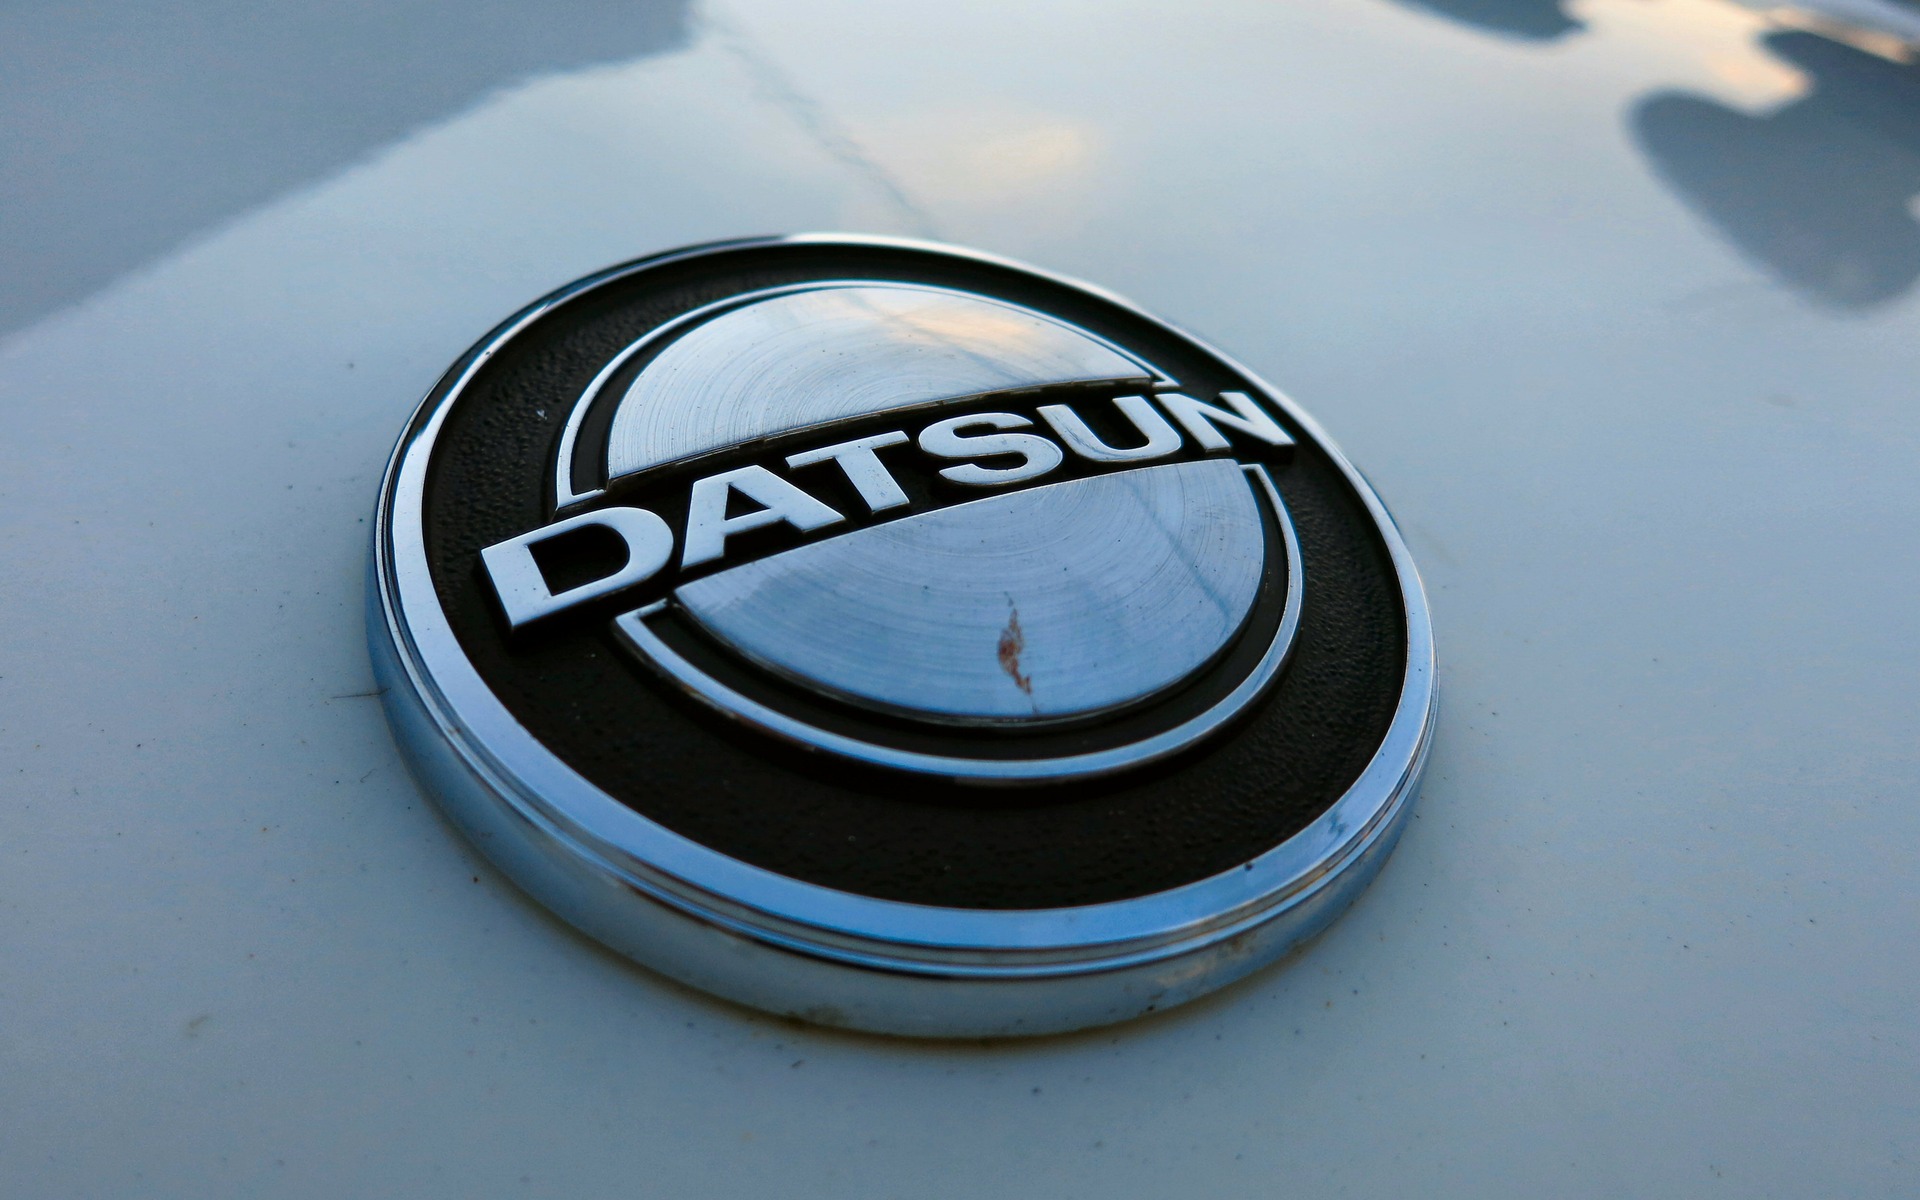 The 280Z closed out an era for Datsun.